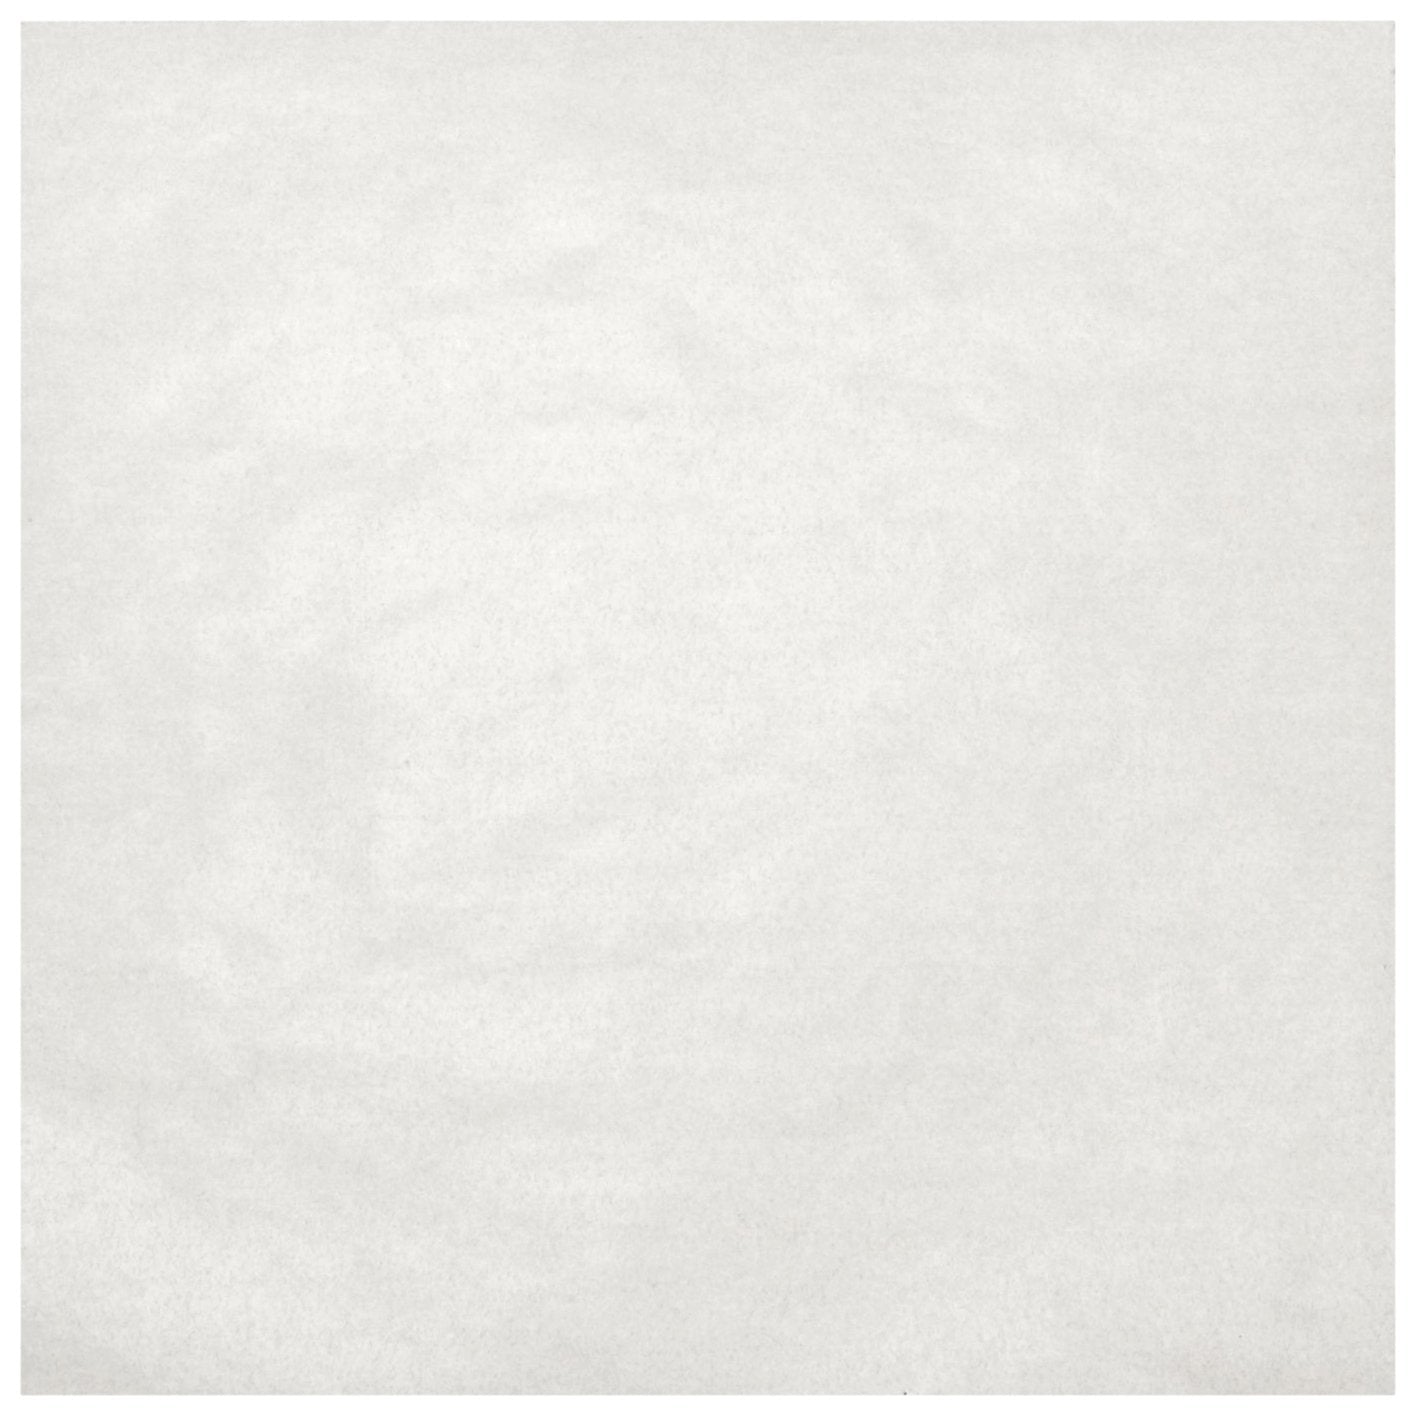 Whatman 10347890 Weighing Papers, Sheets, 150mm x 150mm, Grade 2122, 500/pk